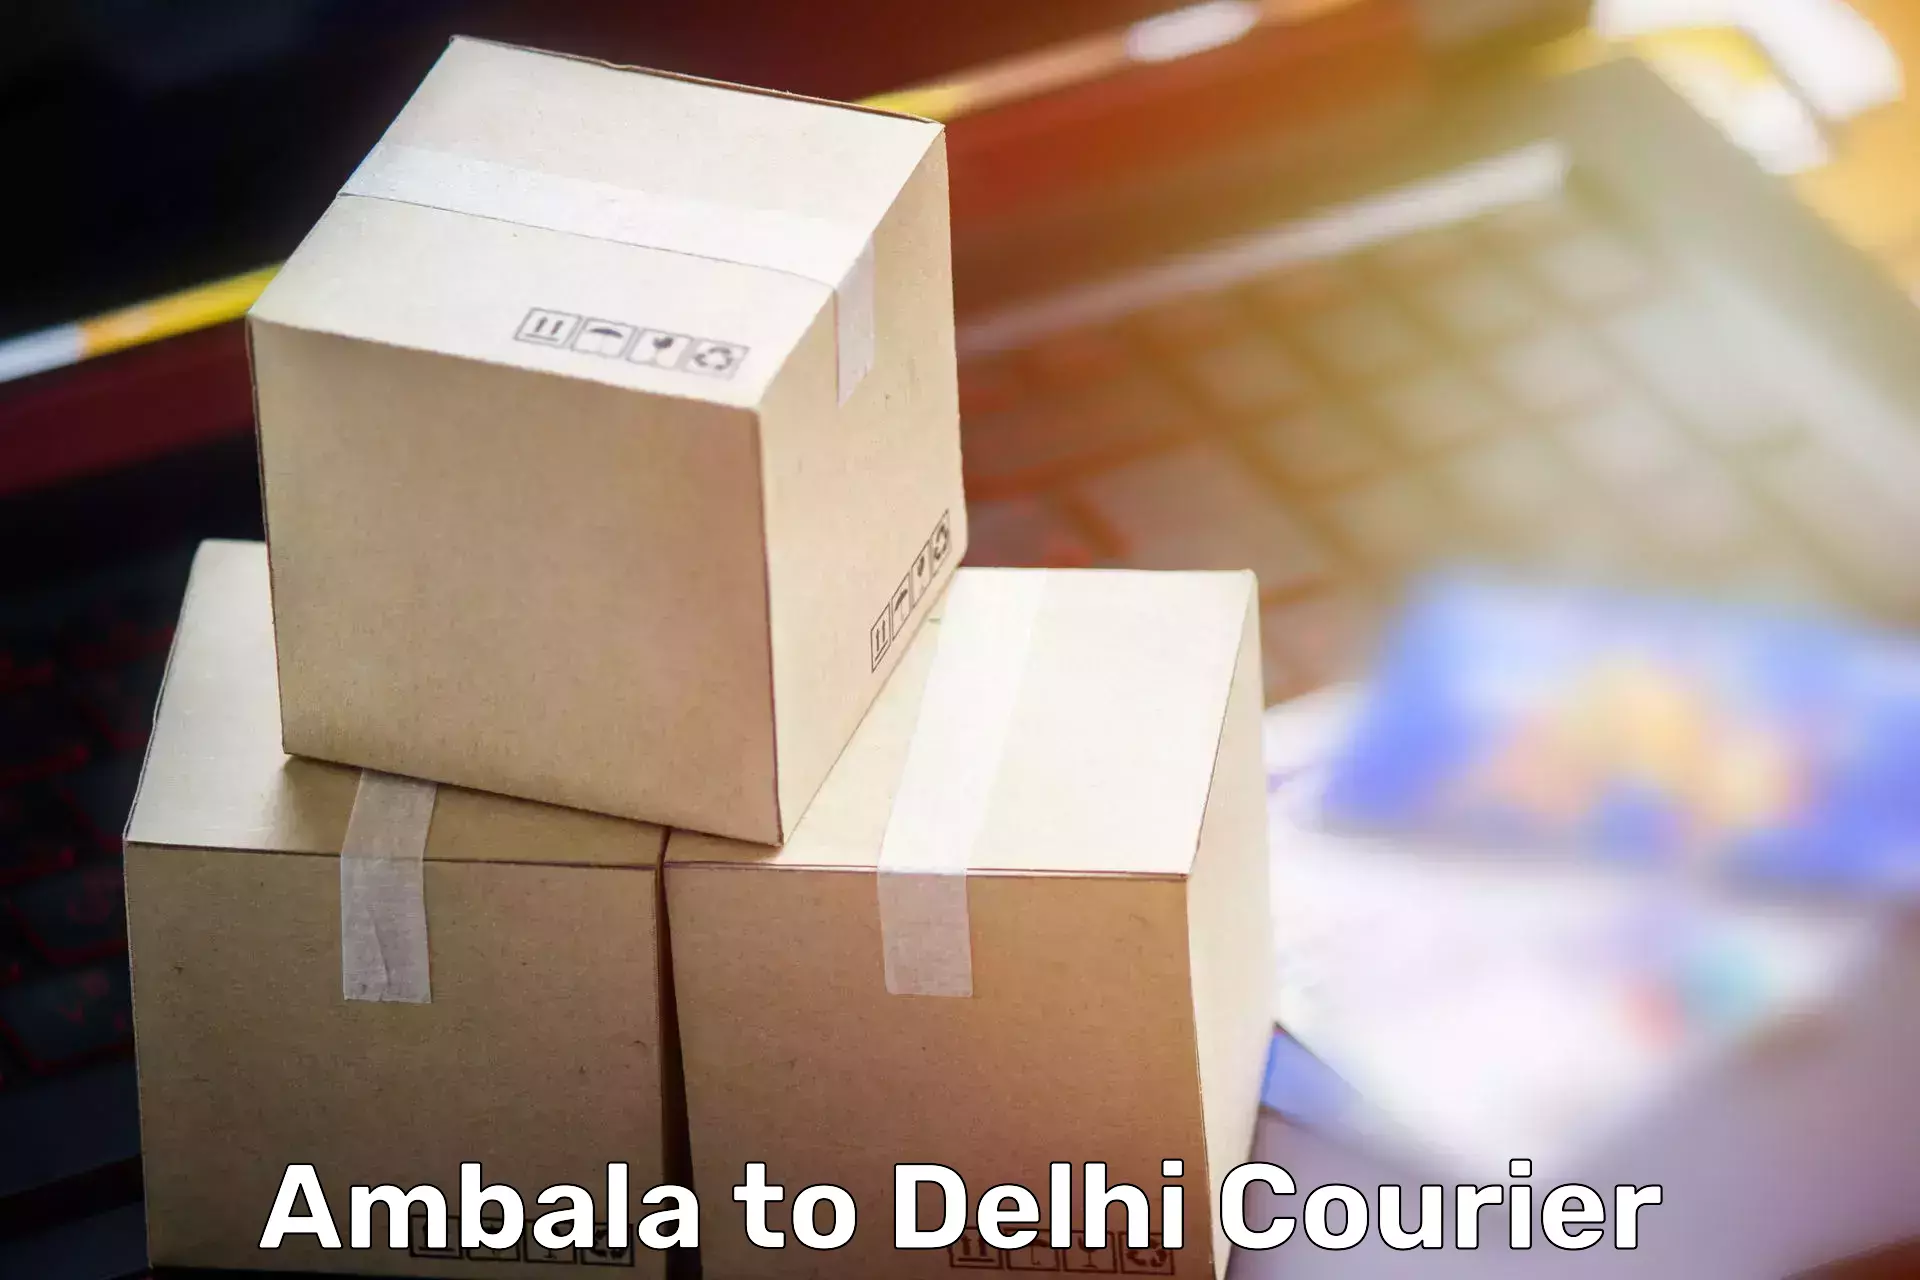 Trusted relocation experts Ambala to Lodhi Road